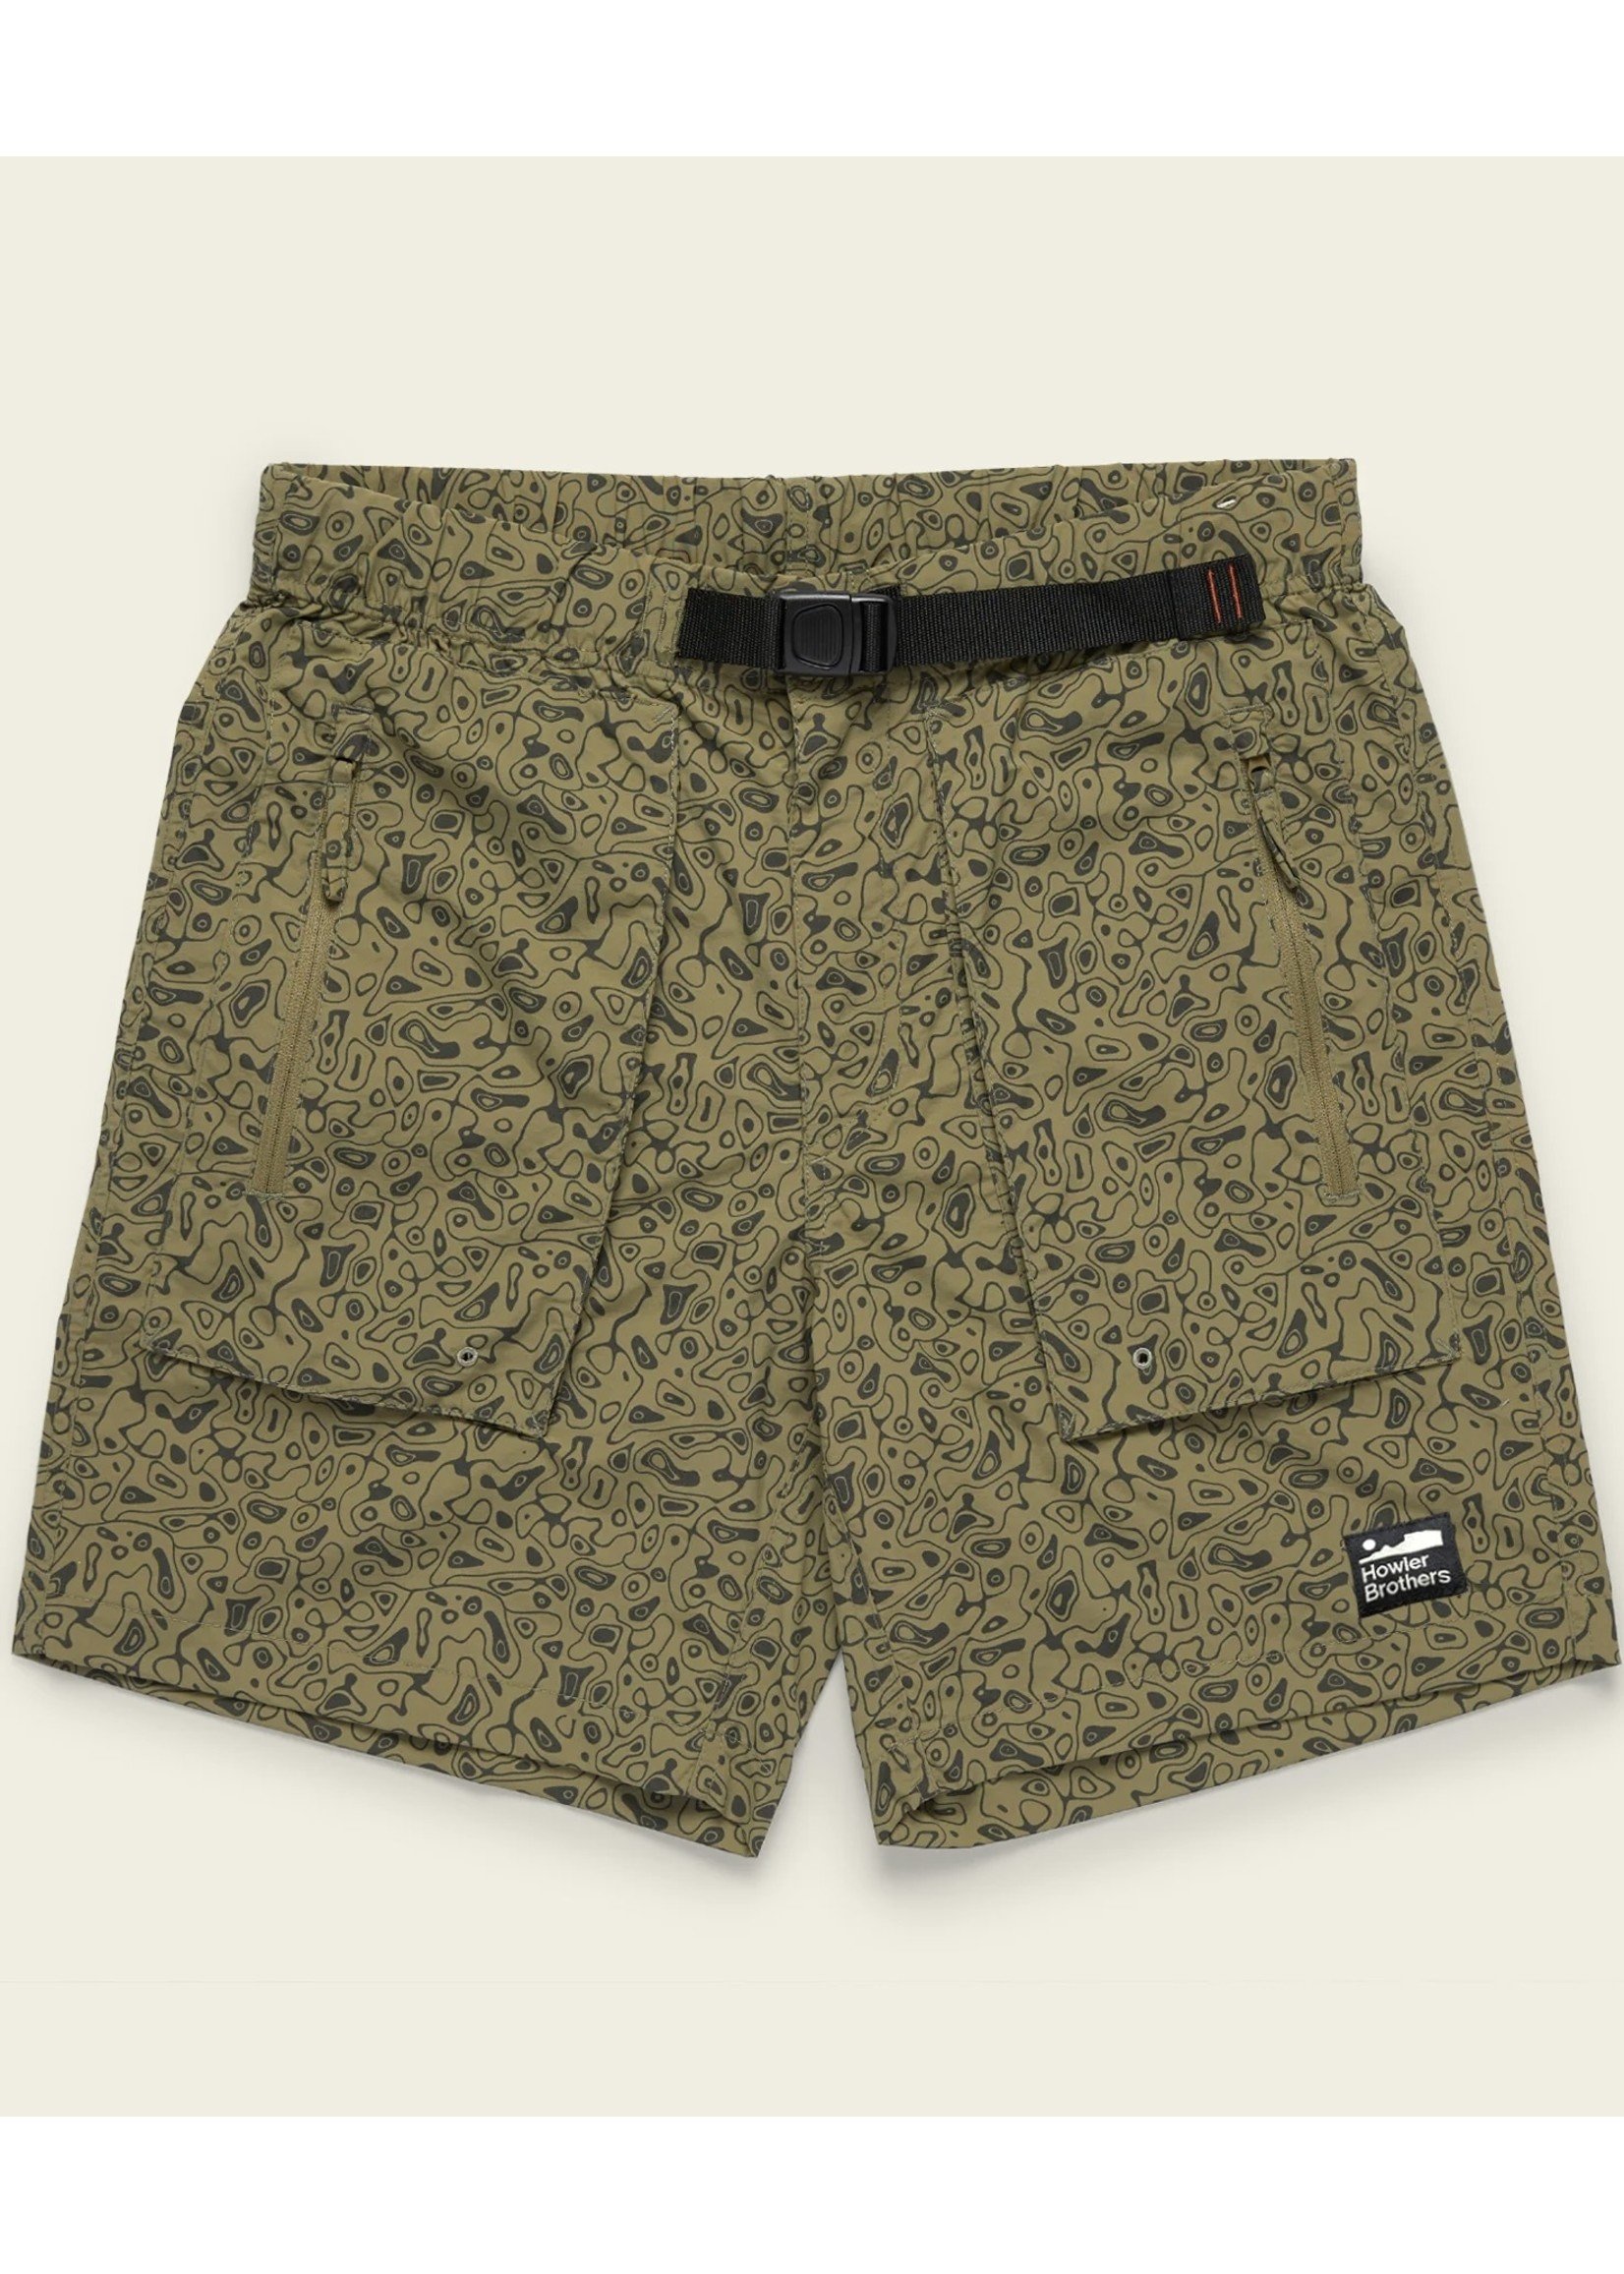 Howler Brothers Pedernales Packable Shorts  Alchemy Aloe